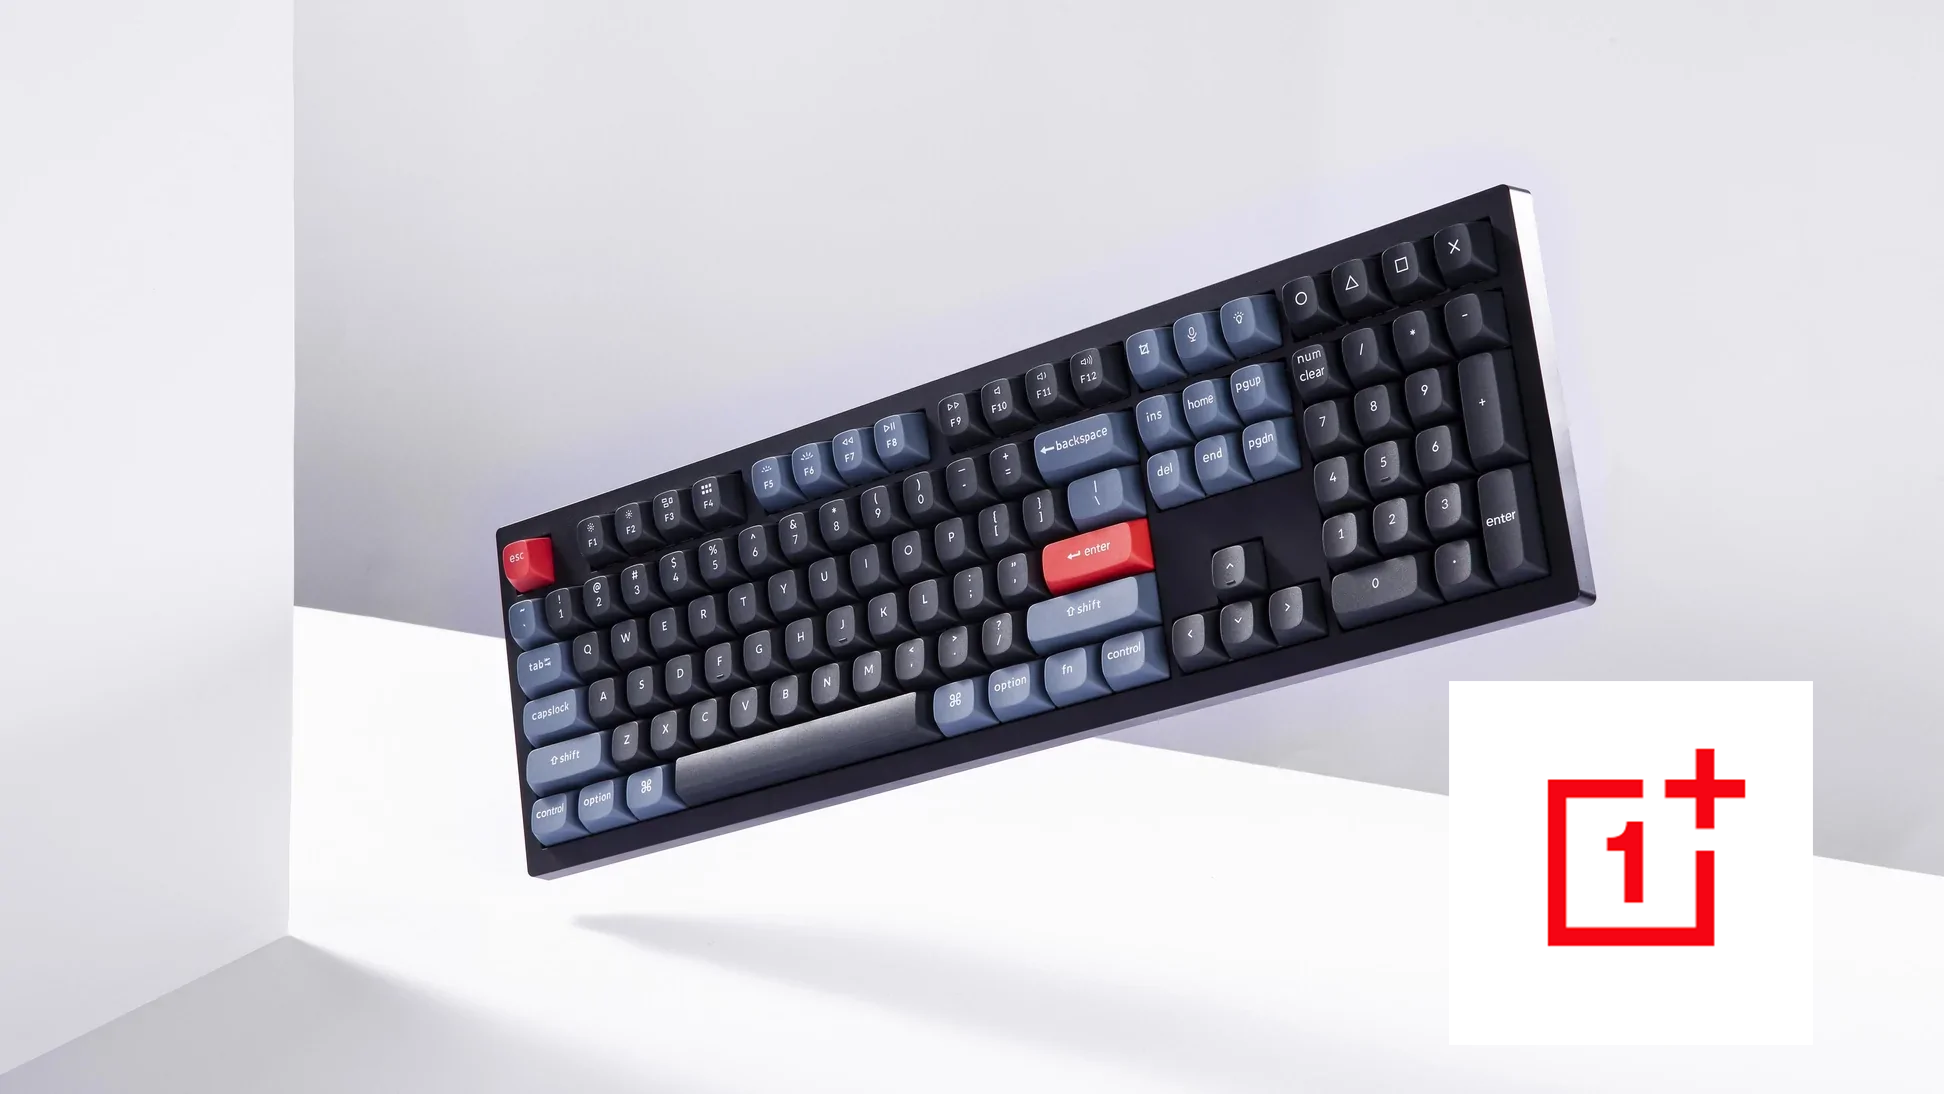 OnePlus is entering the mechanical keyboard market